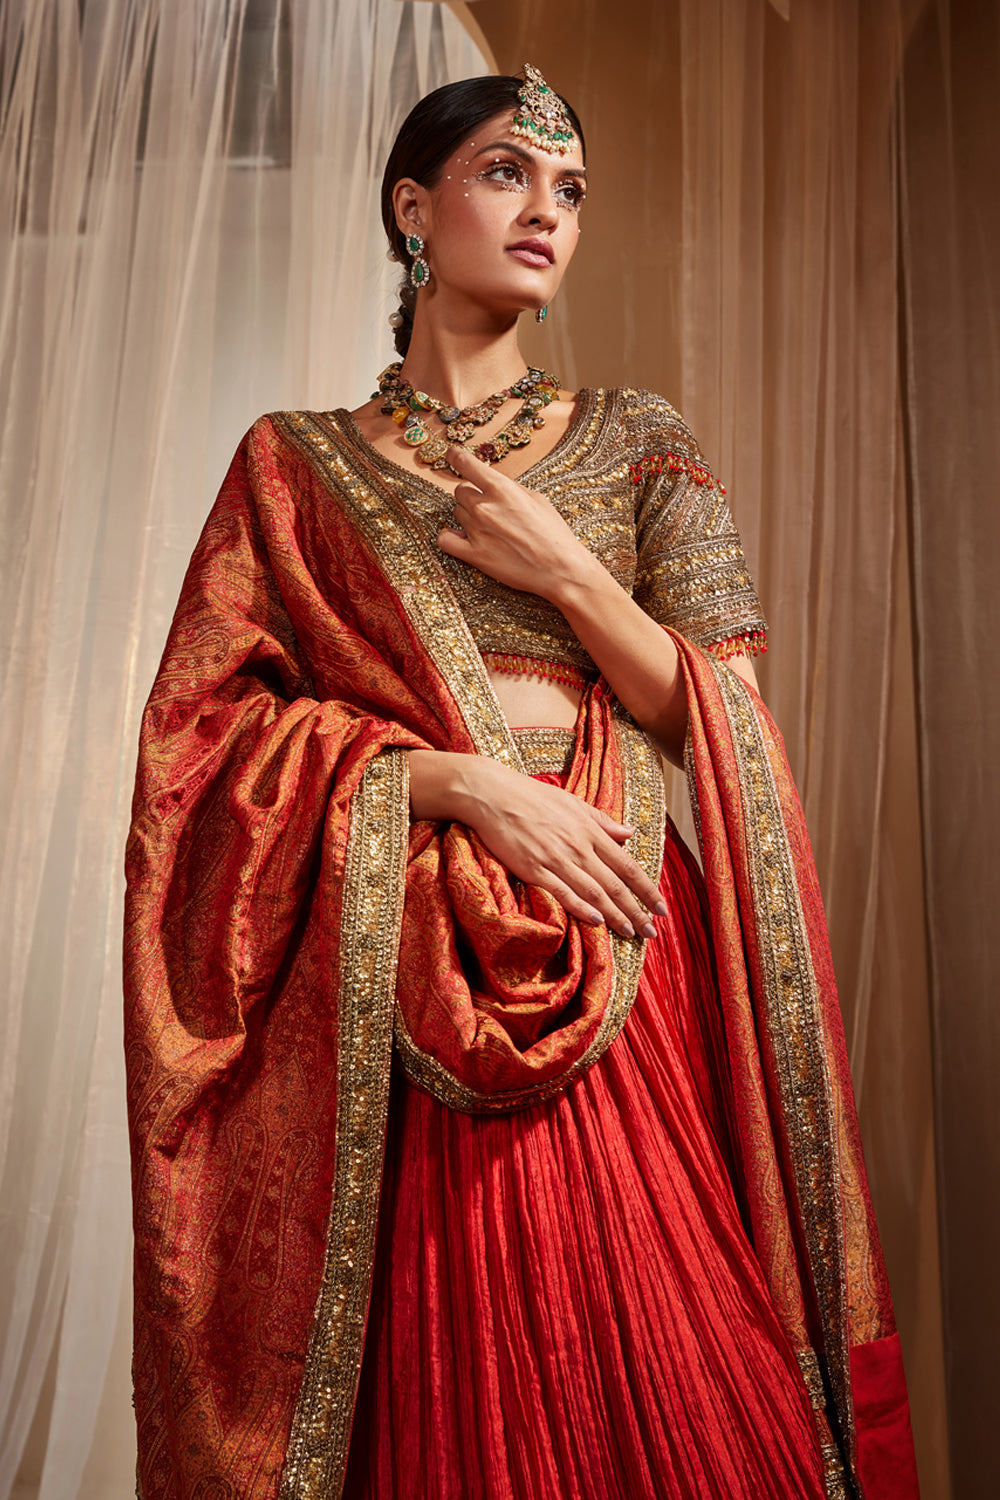 Heavily Sequenced Red Ghagra Choli With Dupatta For Wedding - Ethnic Race